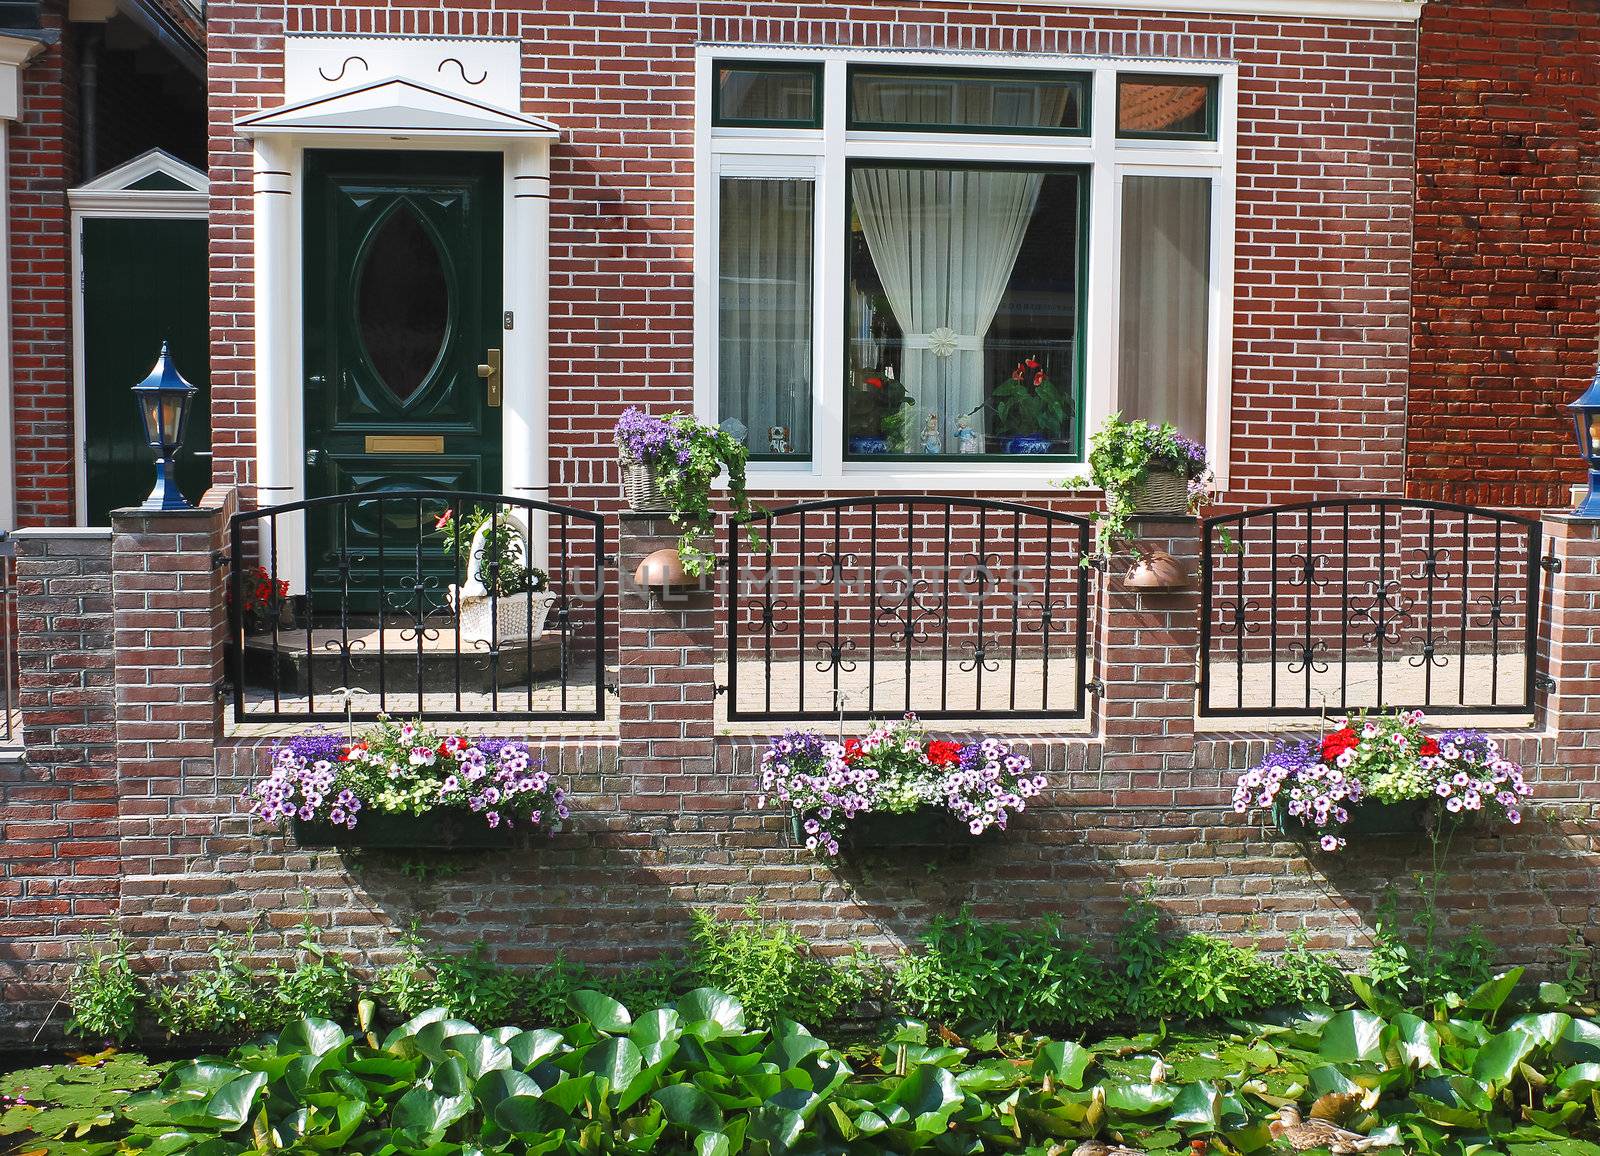 Flowers in front of the Dutch house. Netherlands by NickNick